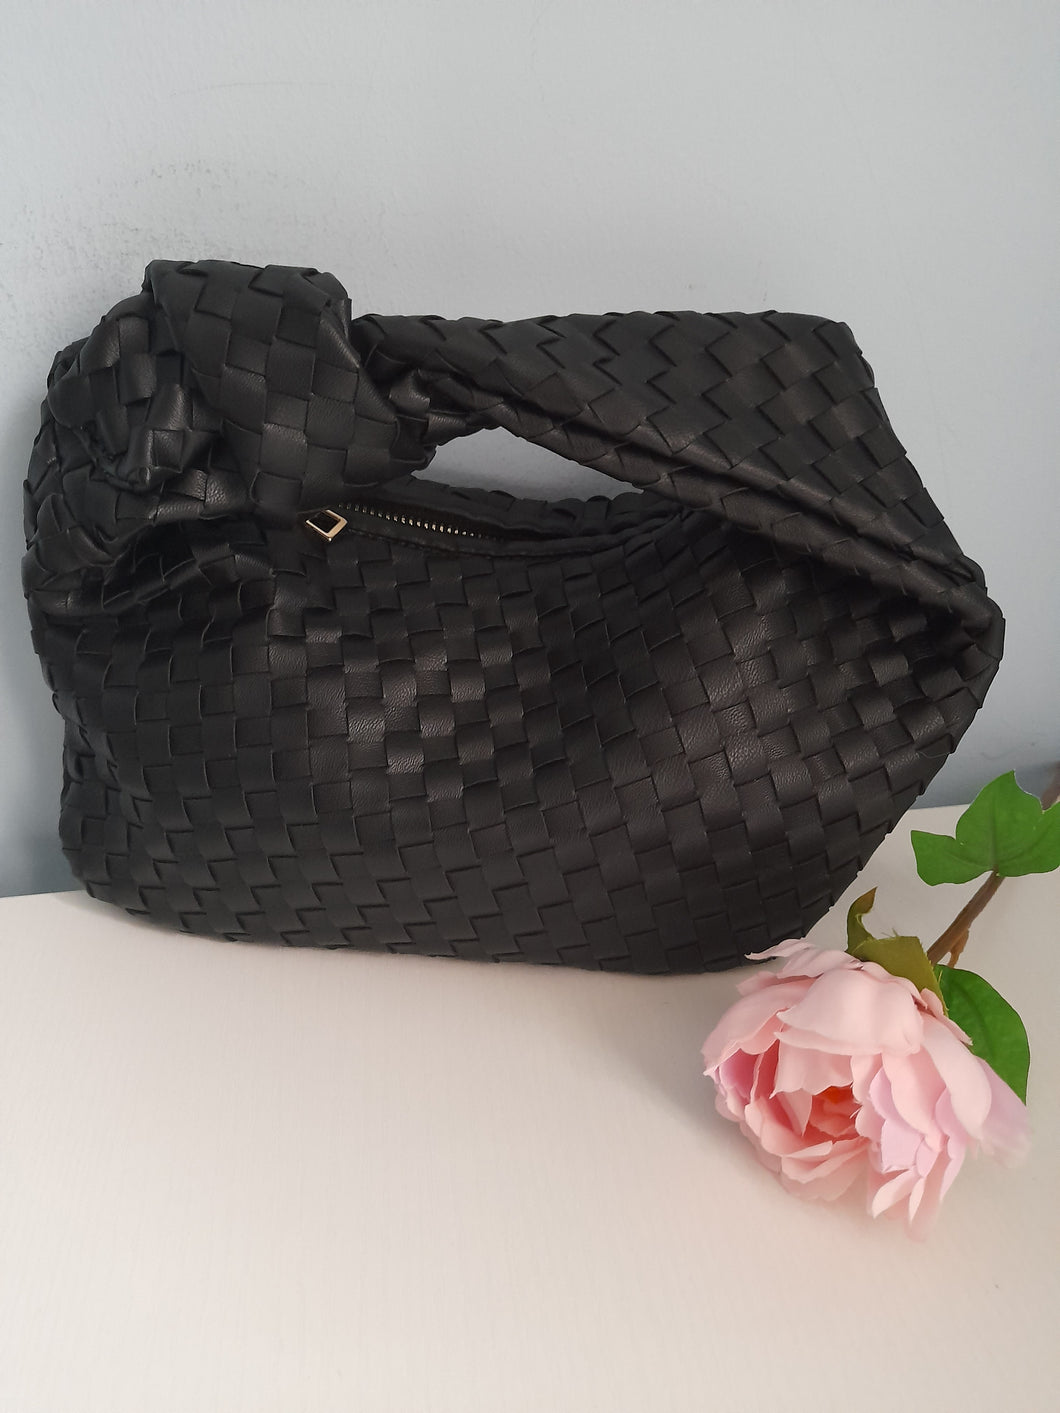 Basket Weave Grab Bag - Available in more colours